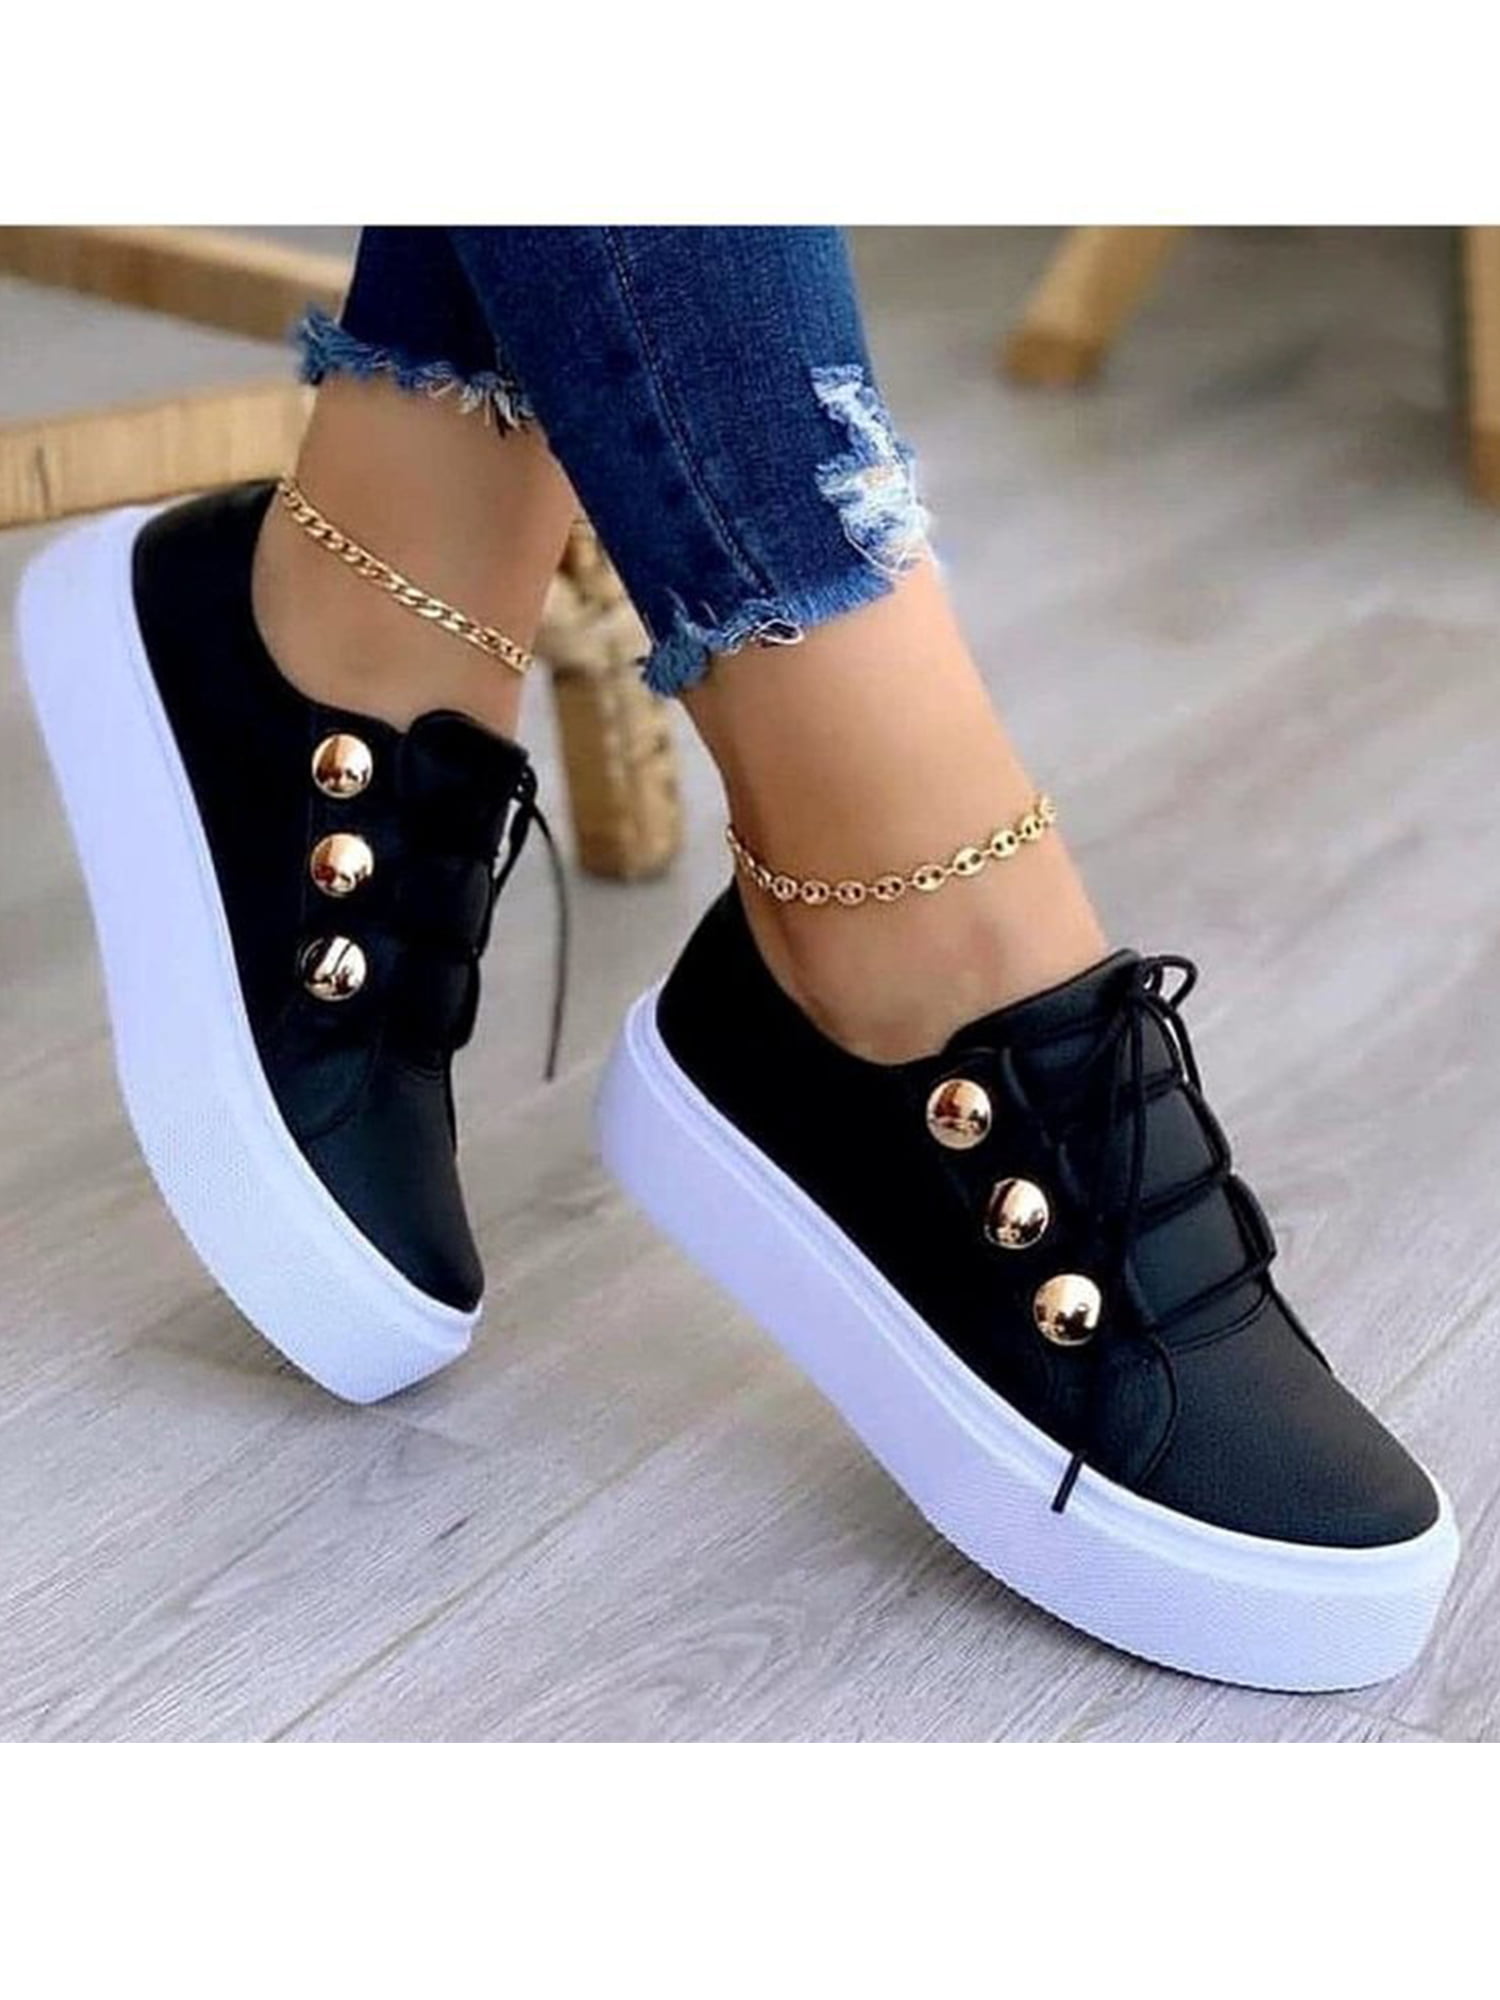 Women Slip On Casual Canvas Sneaker Breathable Running Walking Platform Shoes